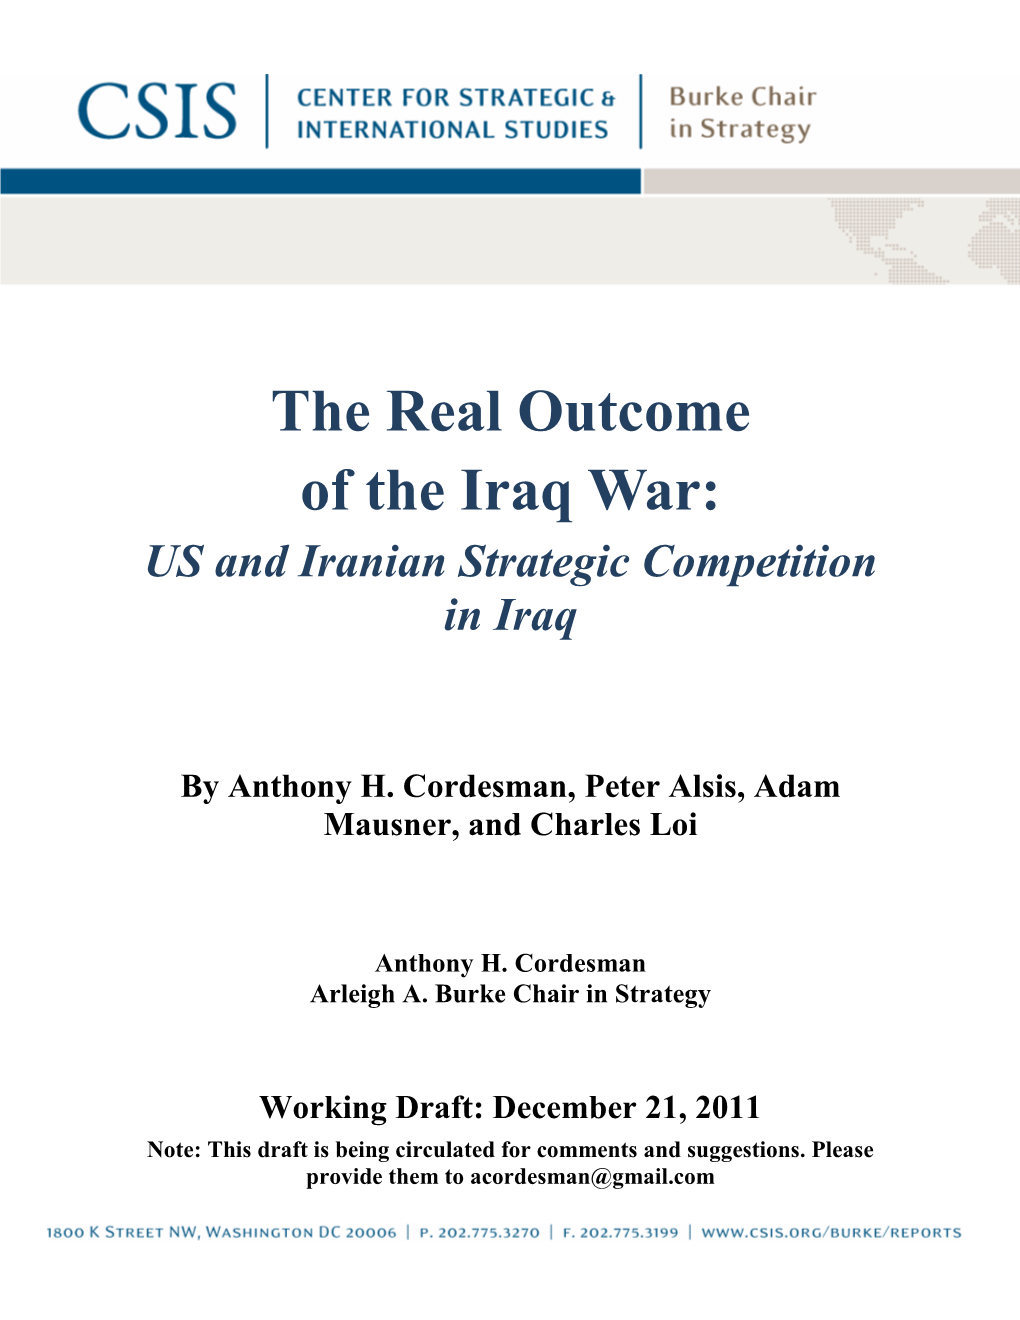 The Real Outcome of the Iraq War: US and Iranian Strategic Competition in Iraq